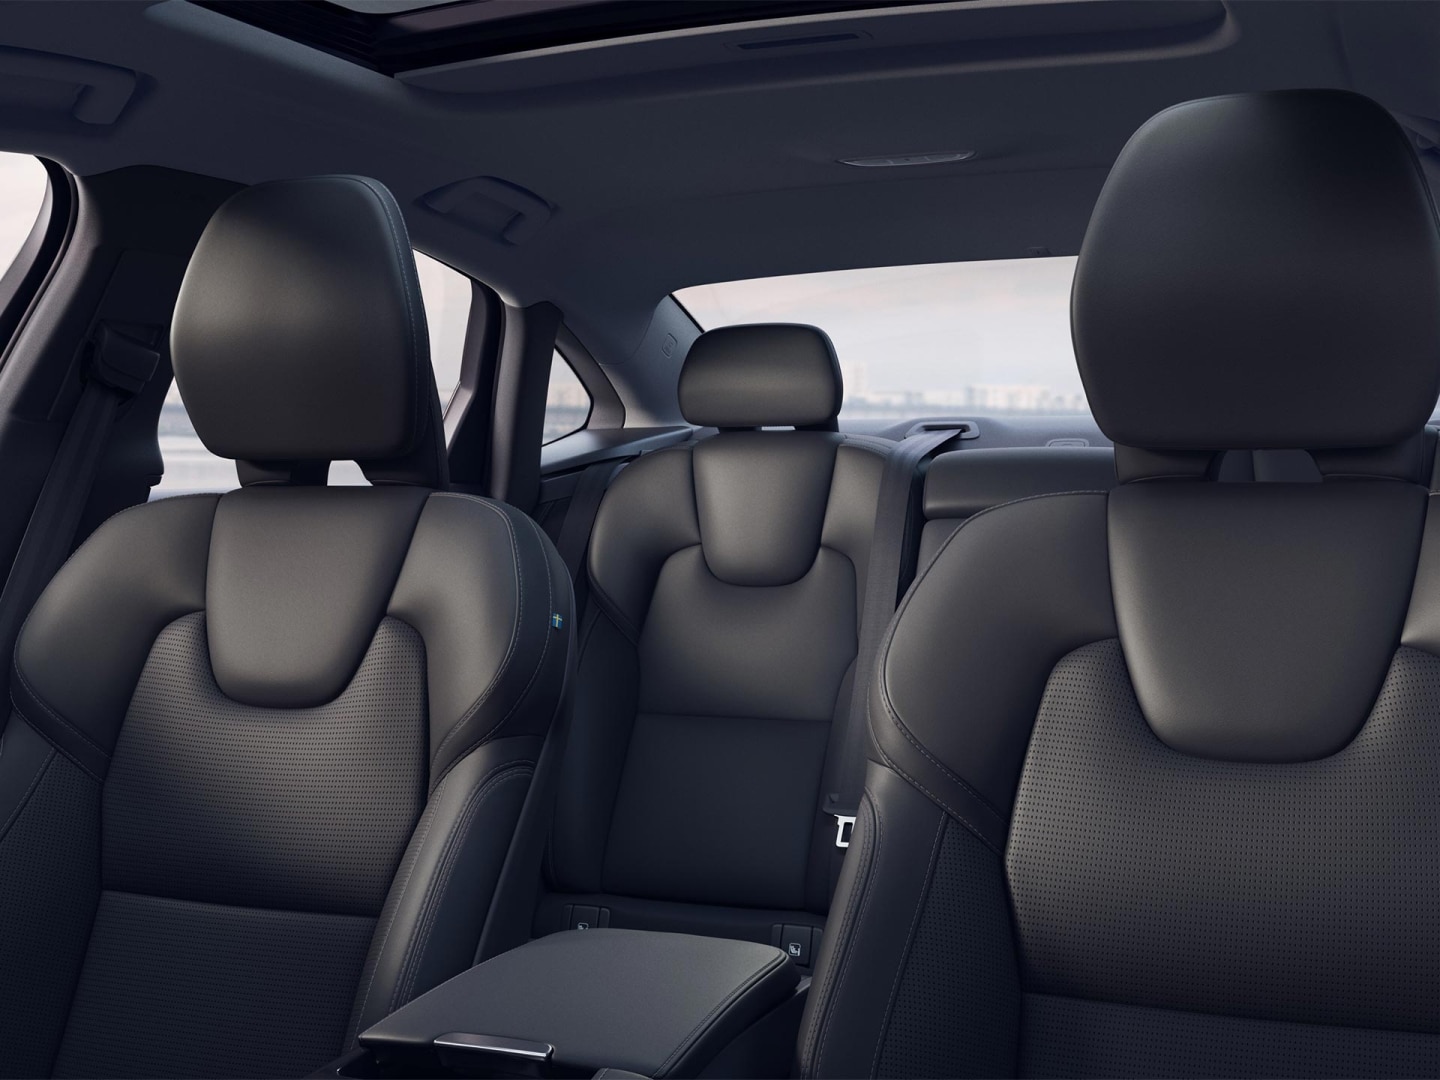 Interior view of the seats in charcoal Nappa leather inside a Volvo S90 Plug-in hybrid.